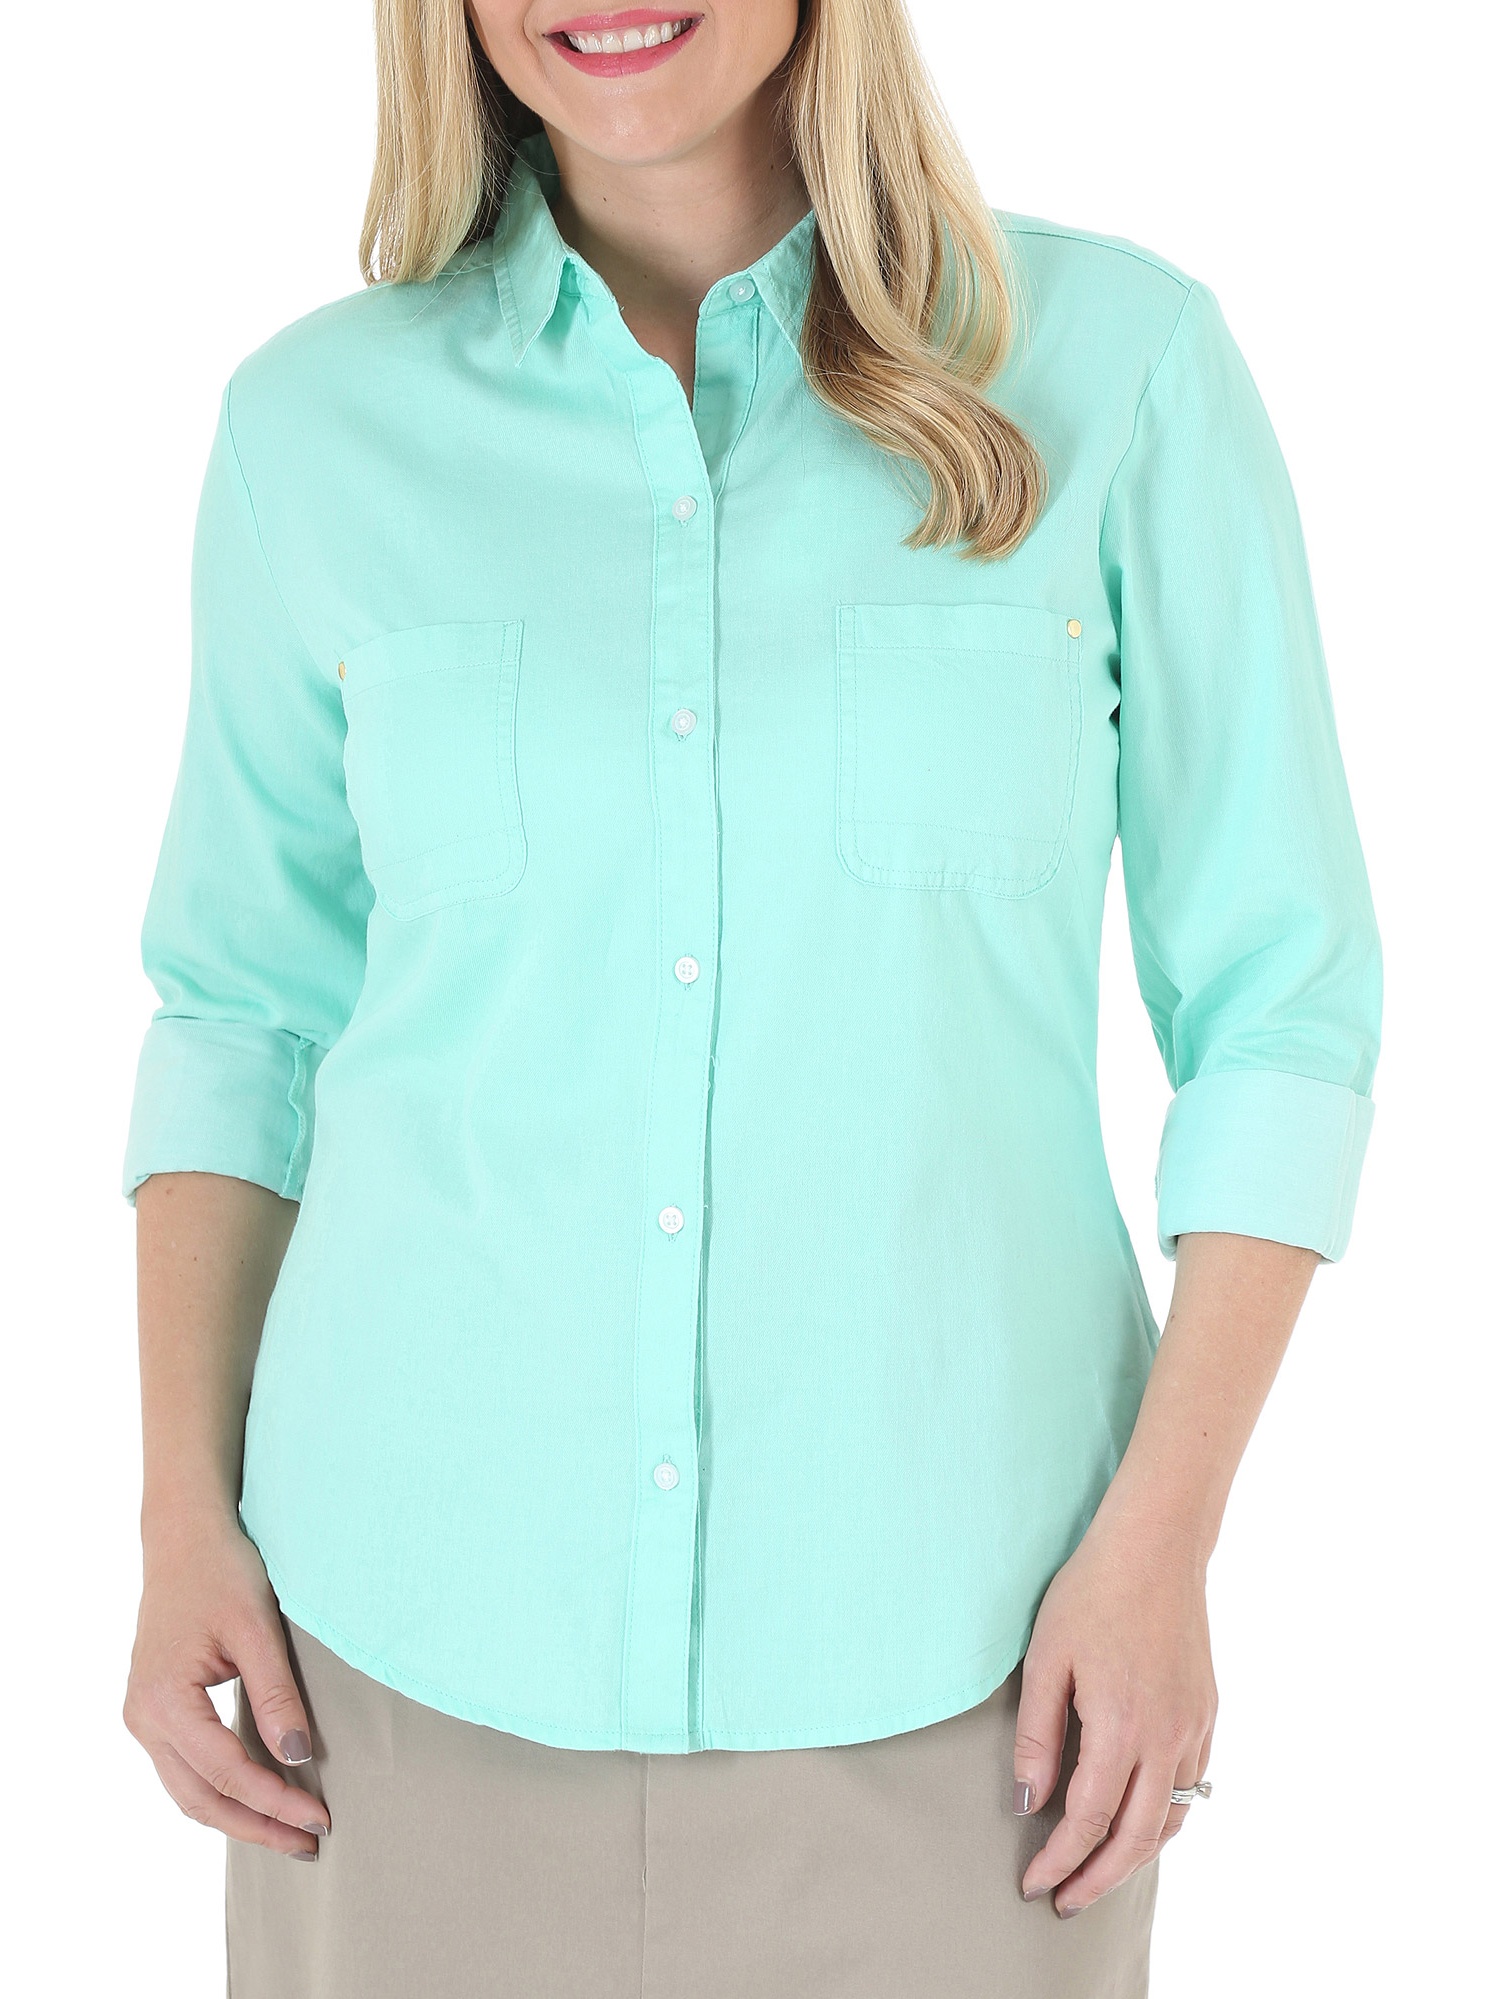 Riders by Lee Women's Woven Shirt - image 1 of 1